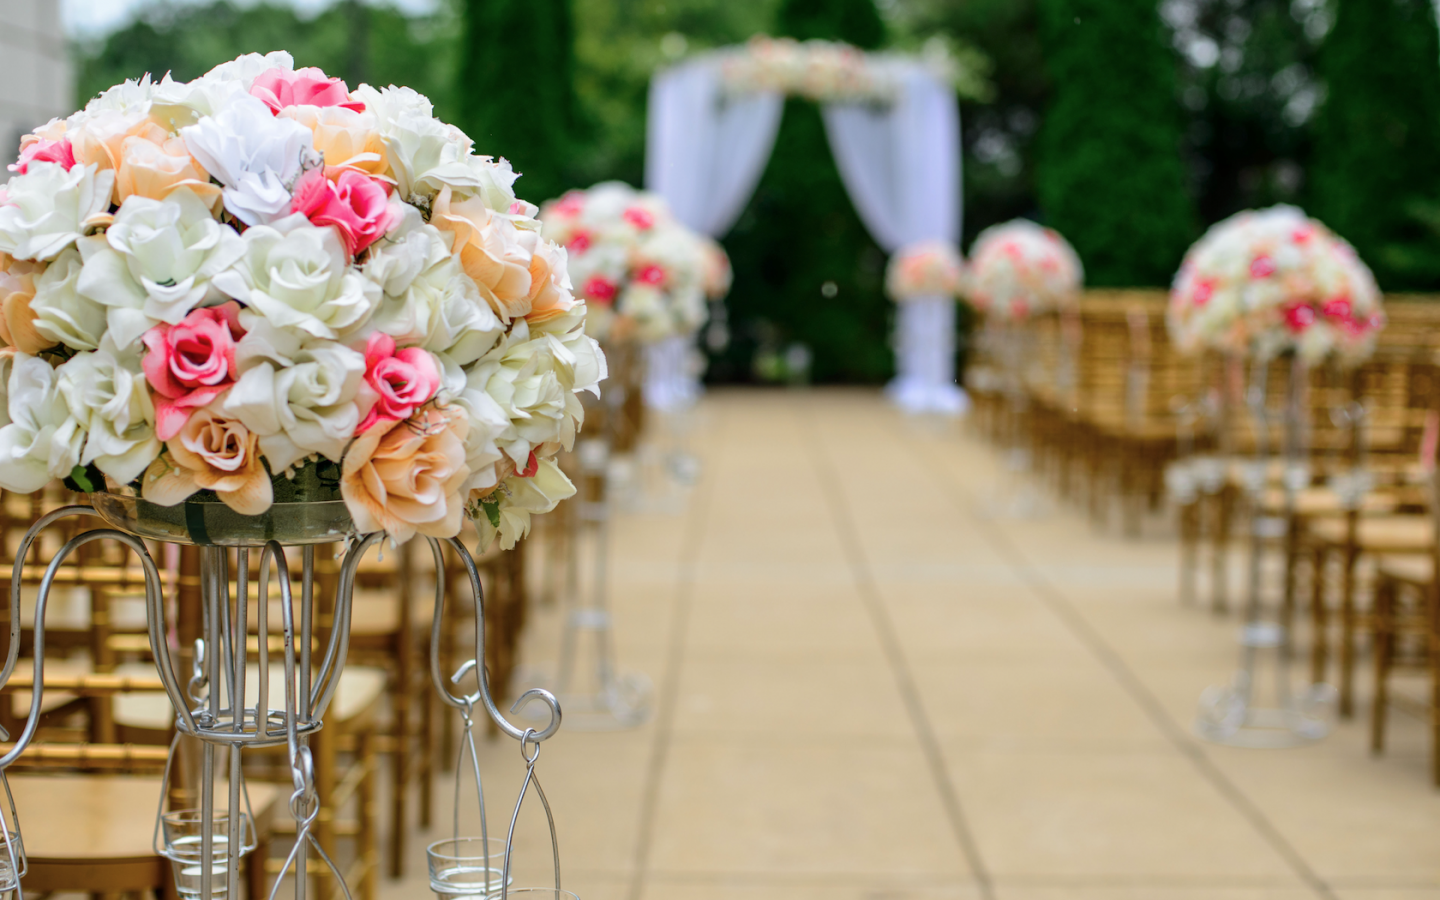 empty wooden chairs next to floral decorations, with a wedding bough in the far background